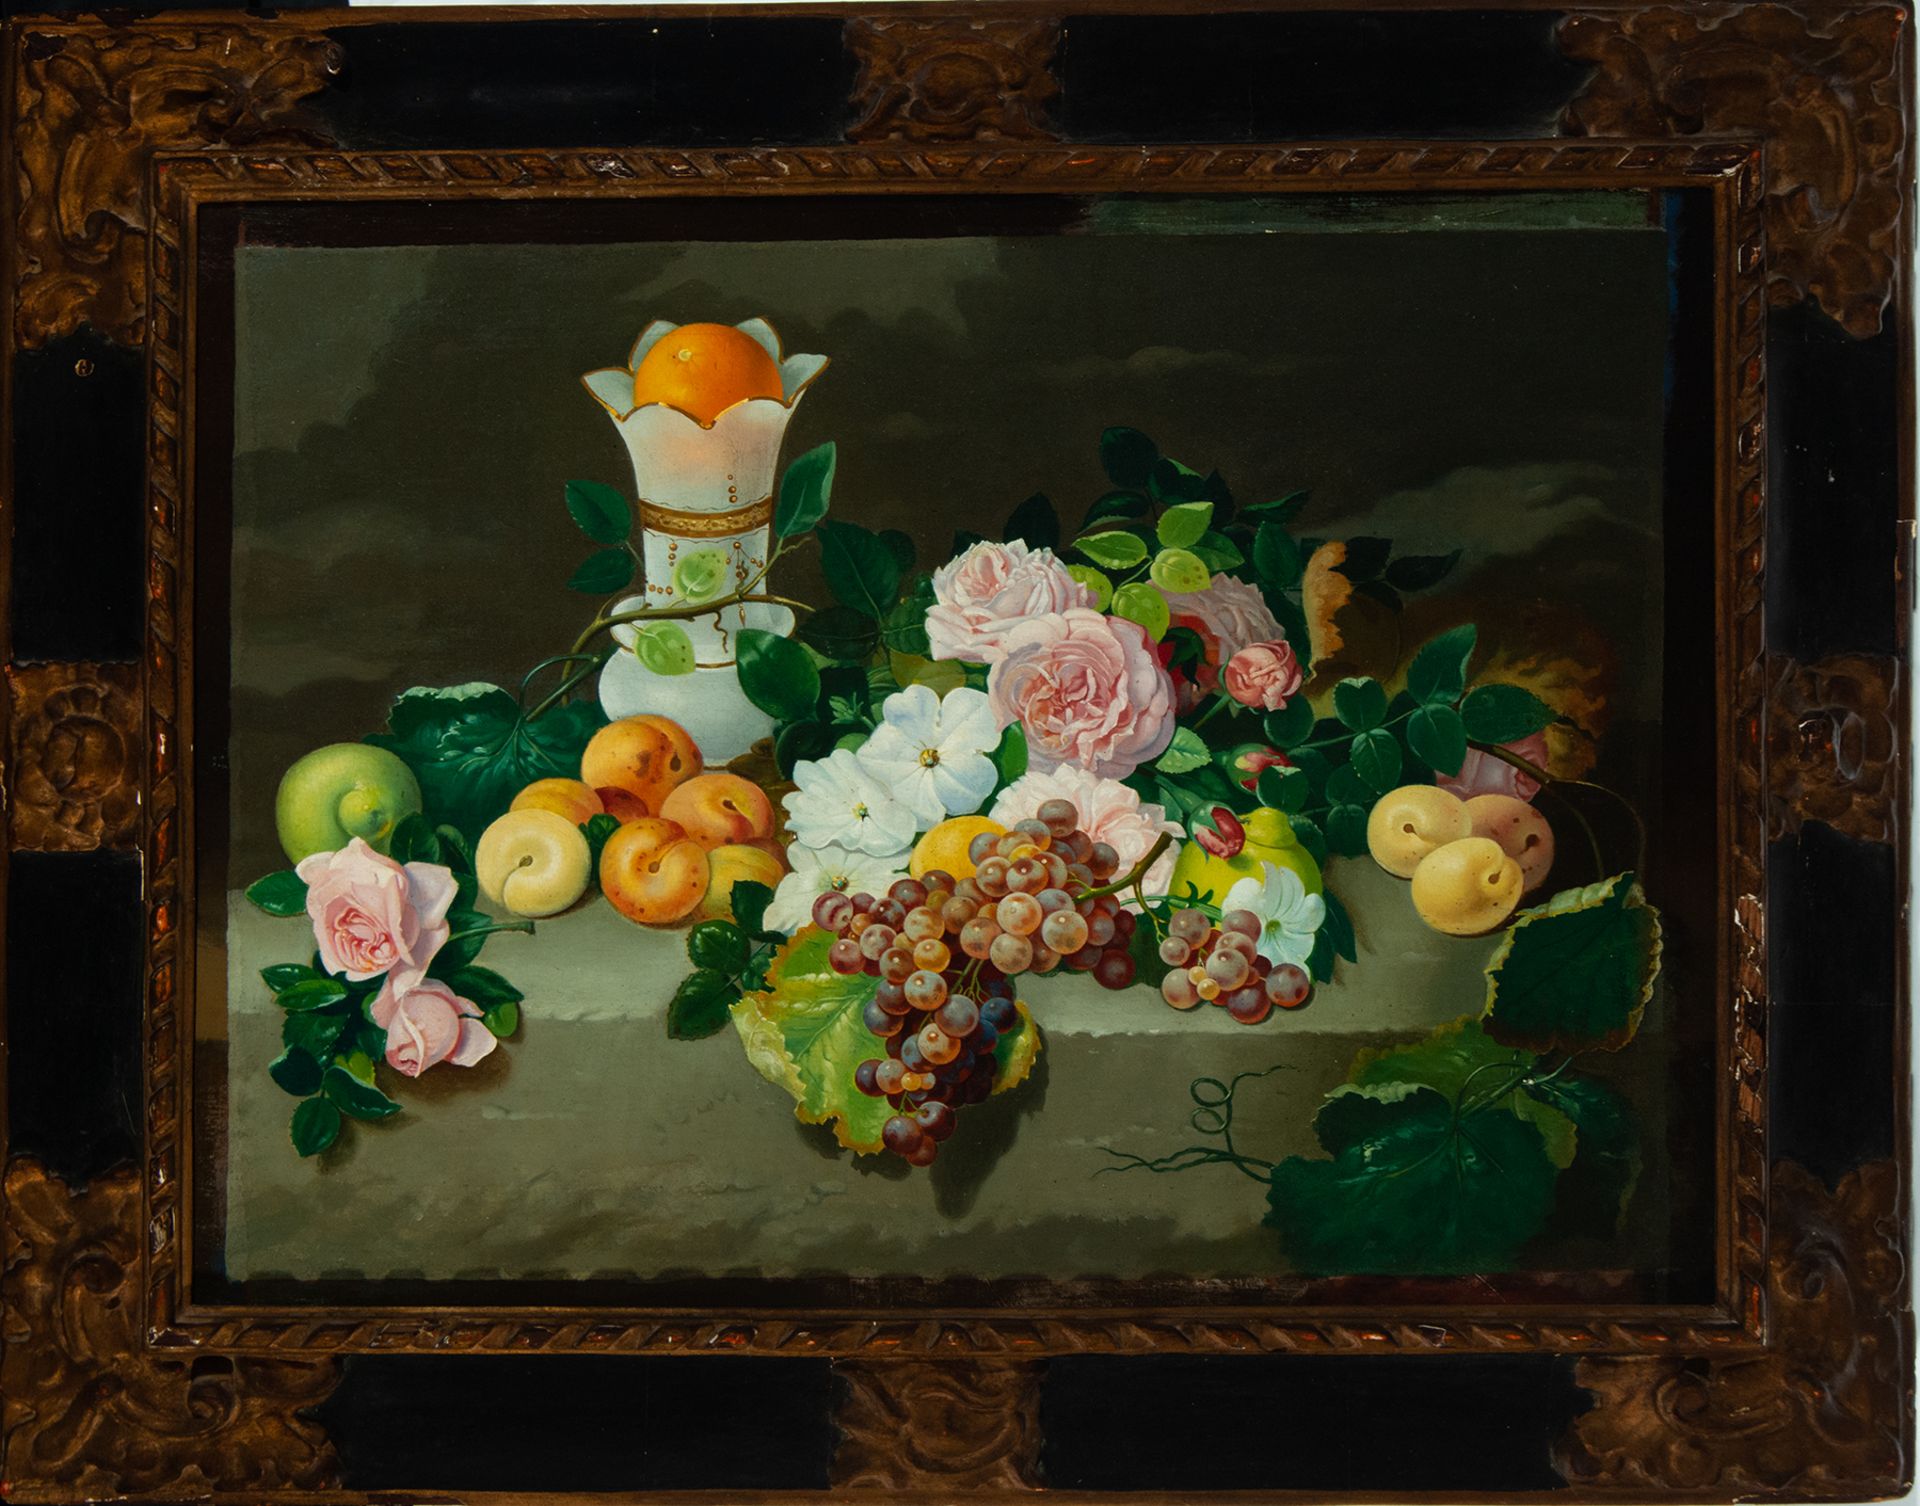 Still life, with a Baroque frame from the 17th century